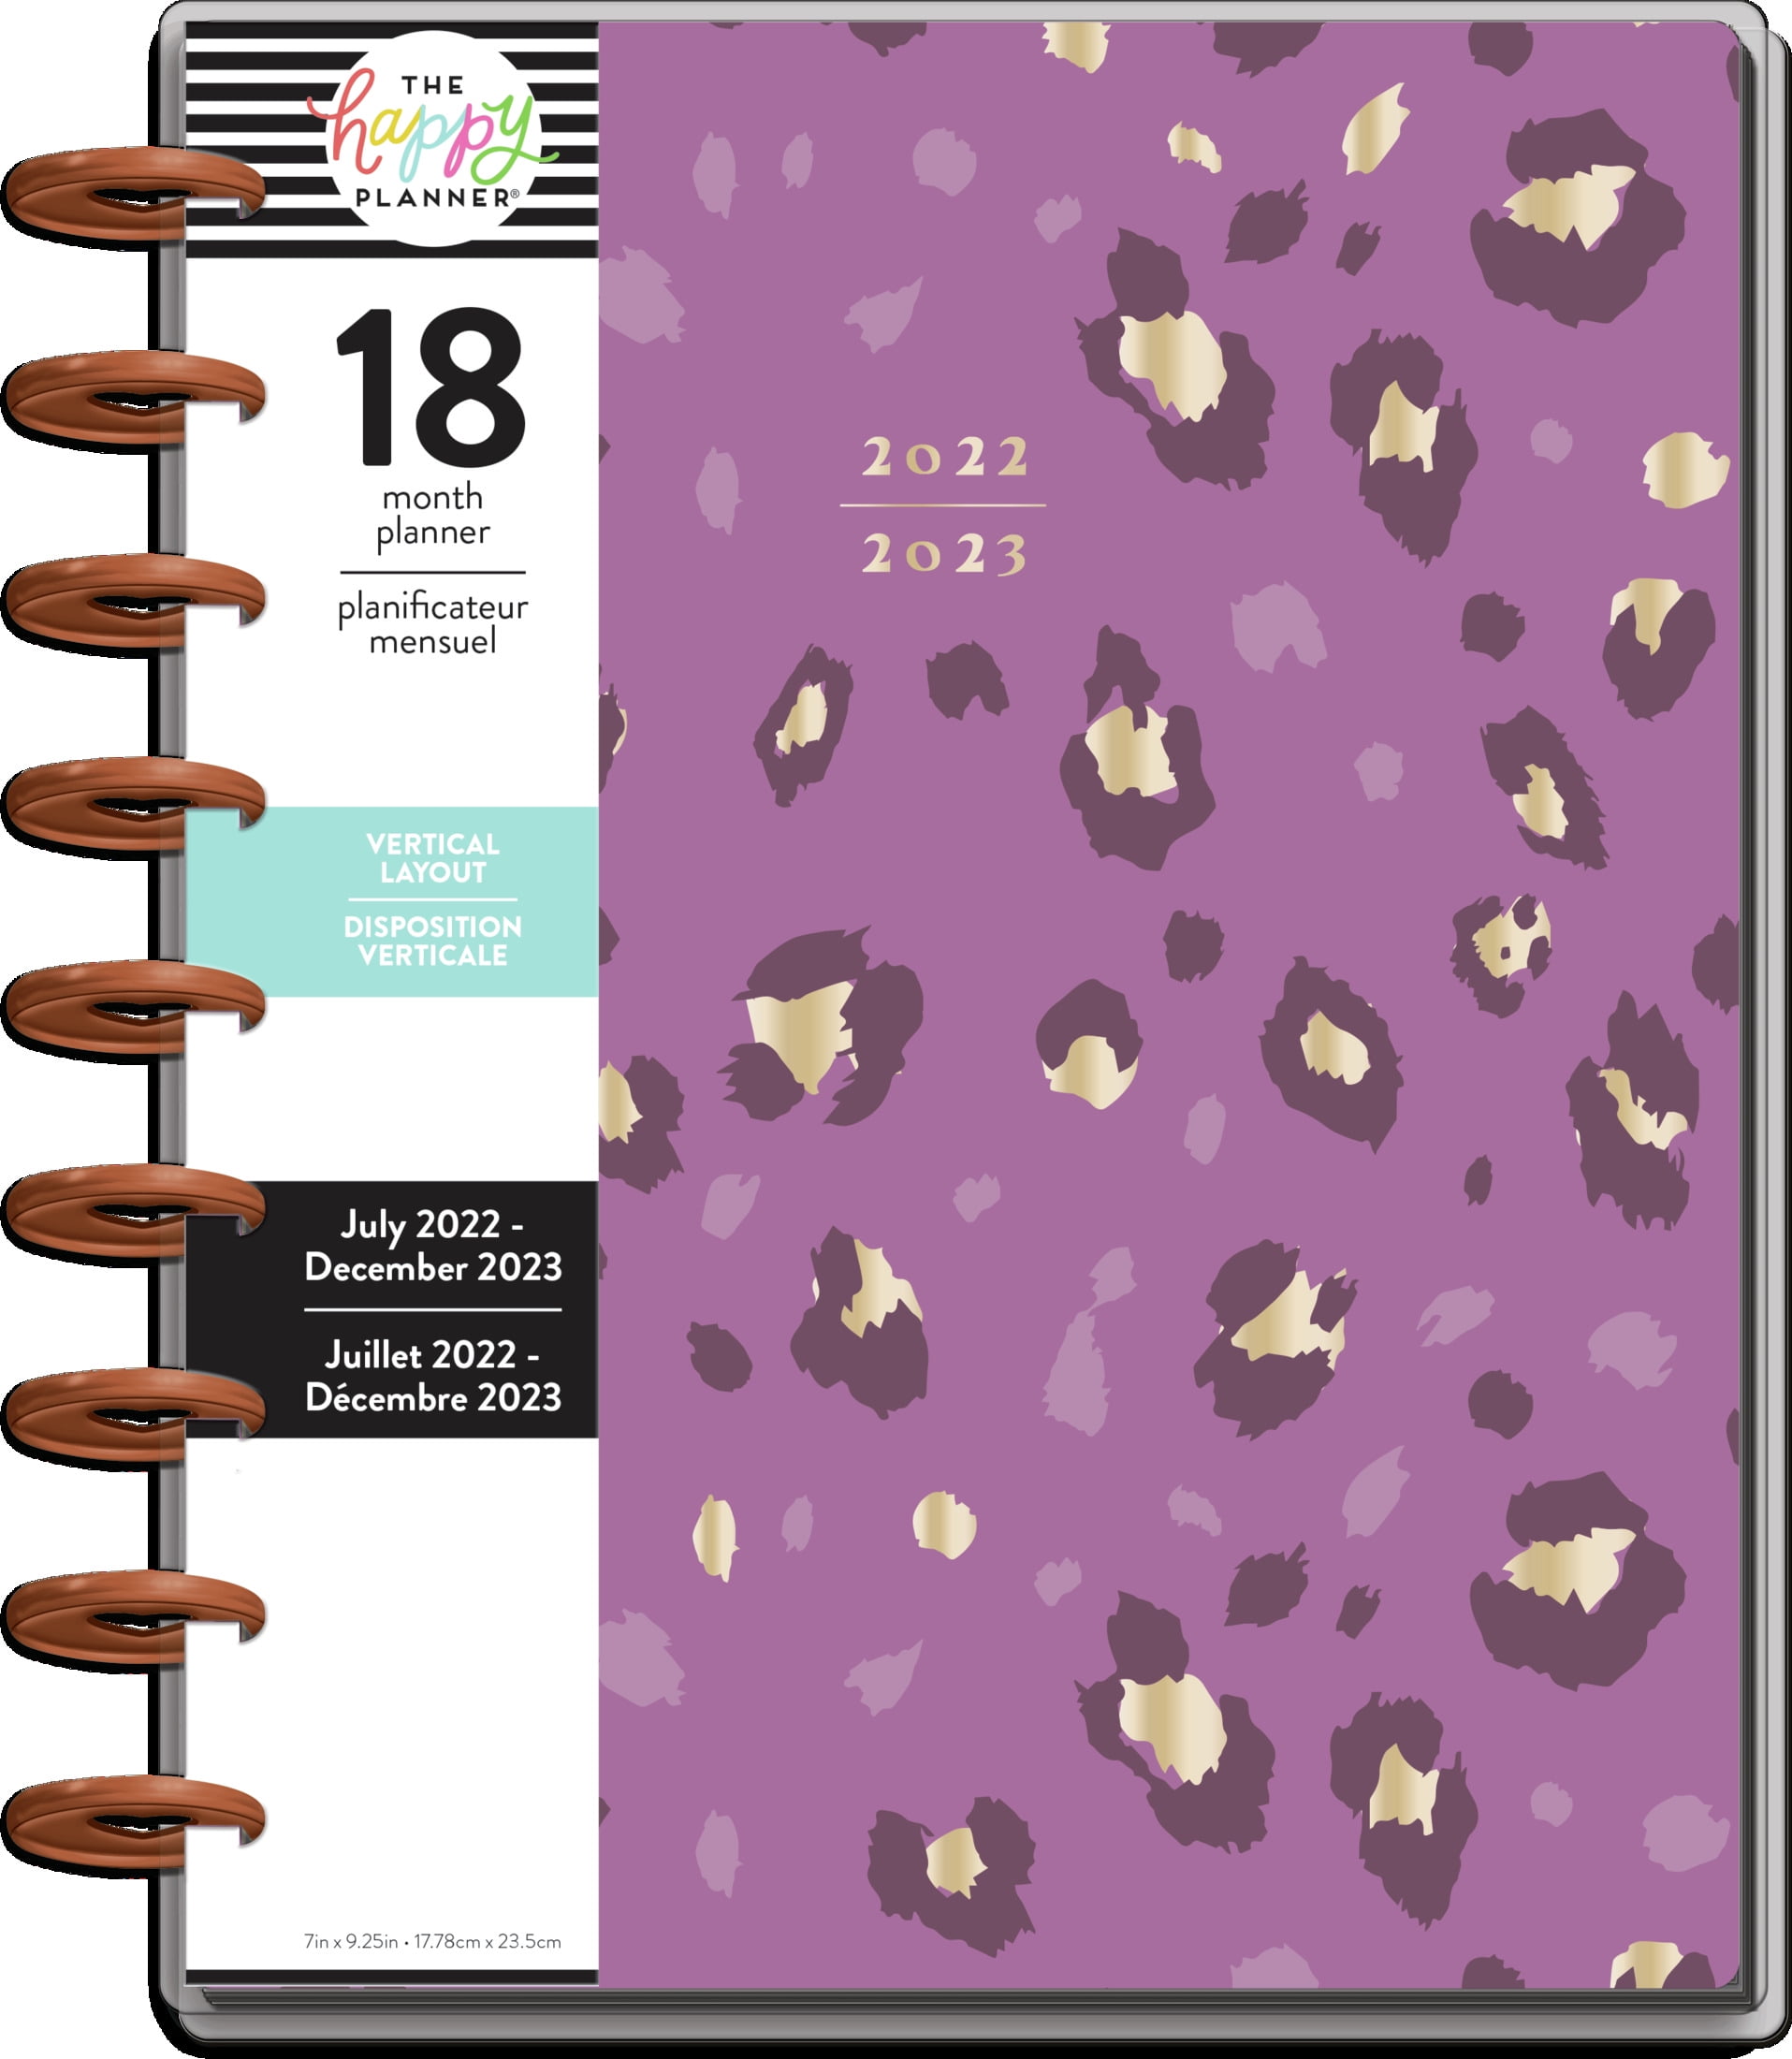 Daily Vertical Layout Oh Happy Day Theme December 2023 The Happy Planner Daily 18 Month Planner July 2022 Weekly & Monthly Twin Loop Bound Pages Big Planner 11.5” x 10.2” 